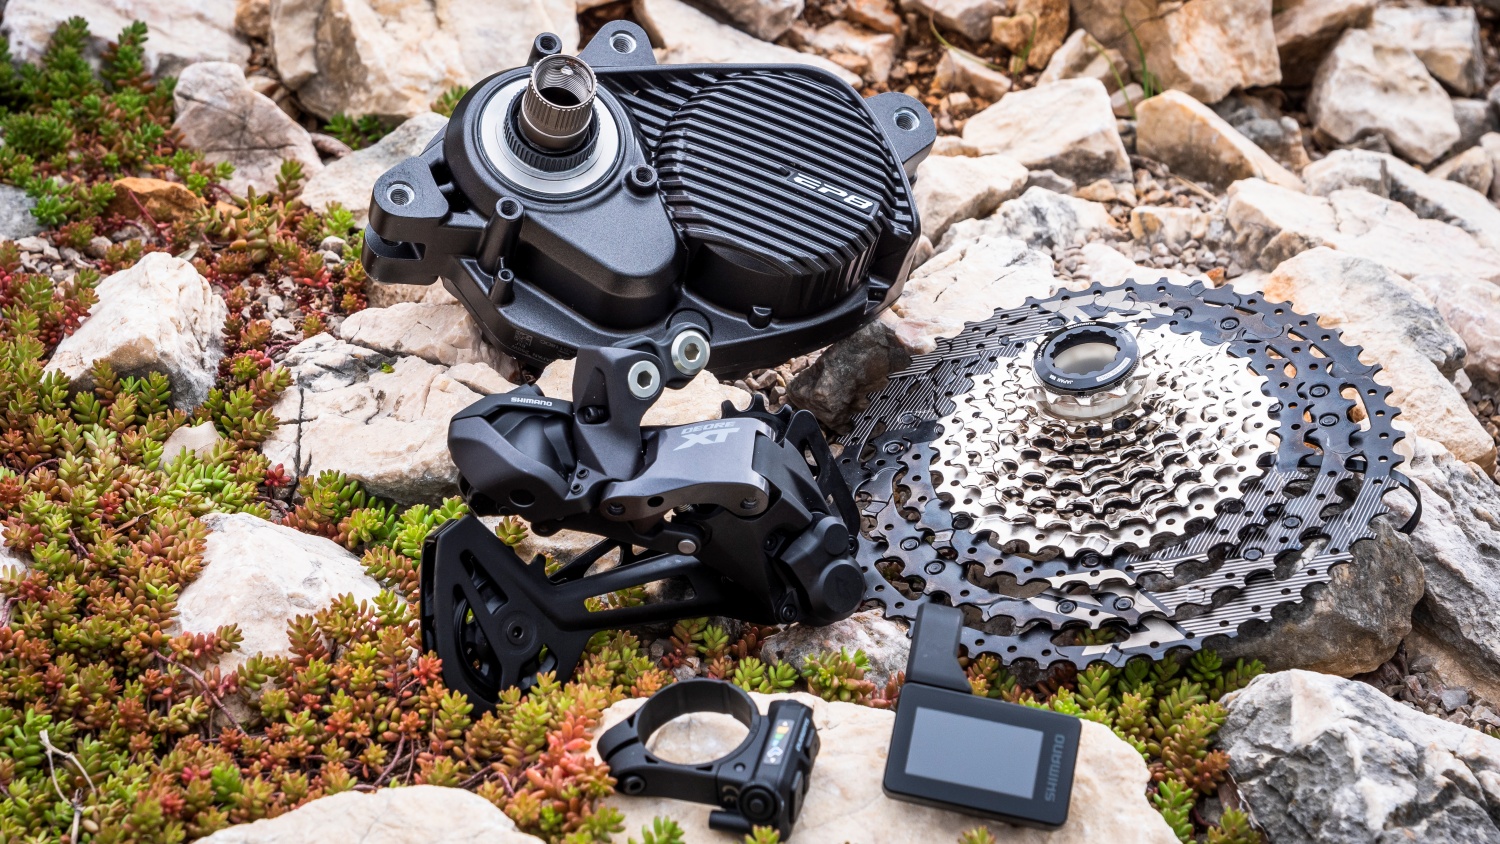 The Shimano EP801 gets both the auto shift and overrun updates.